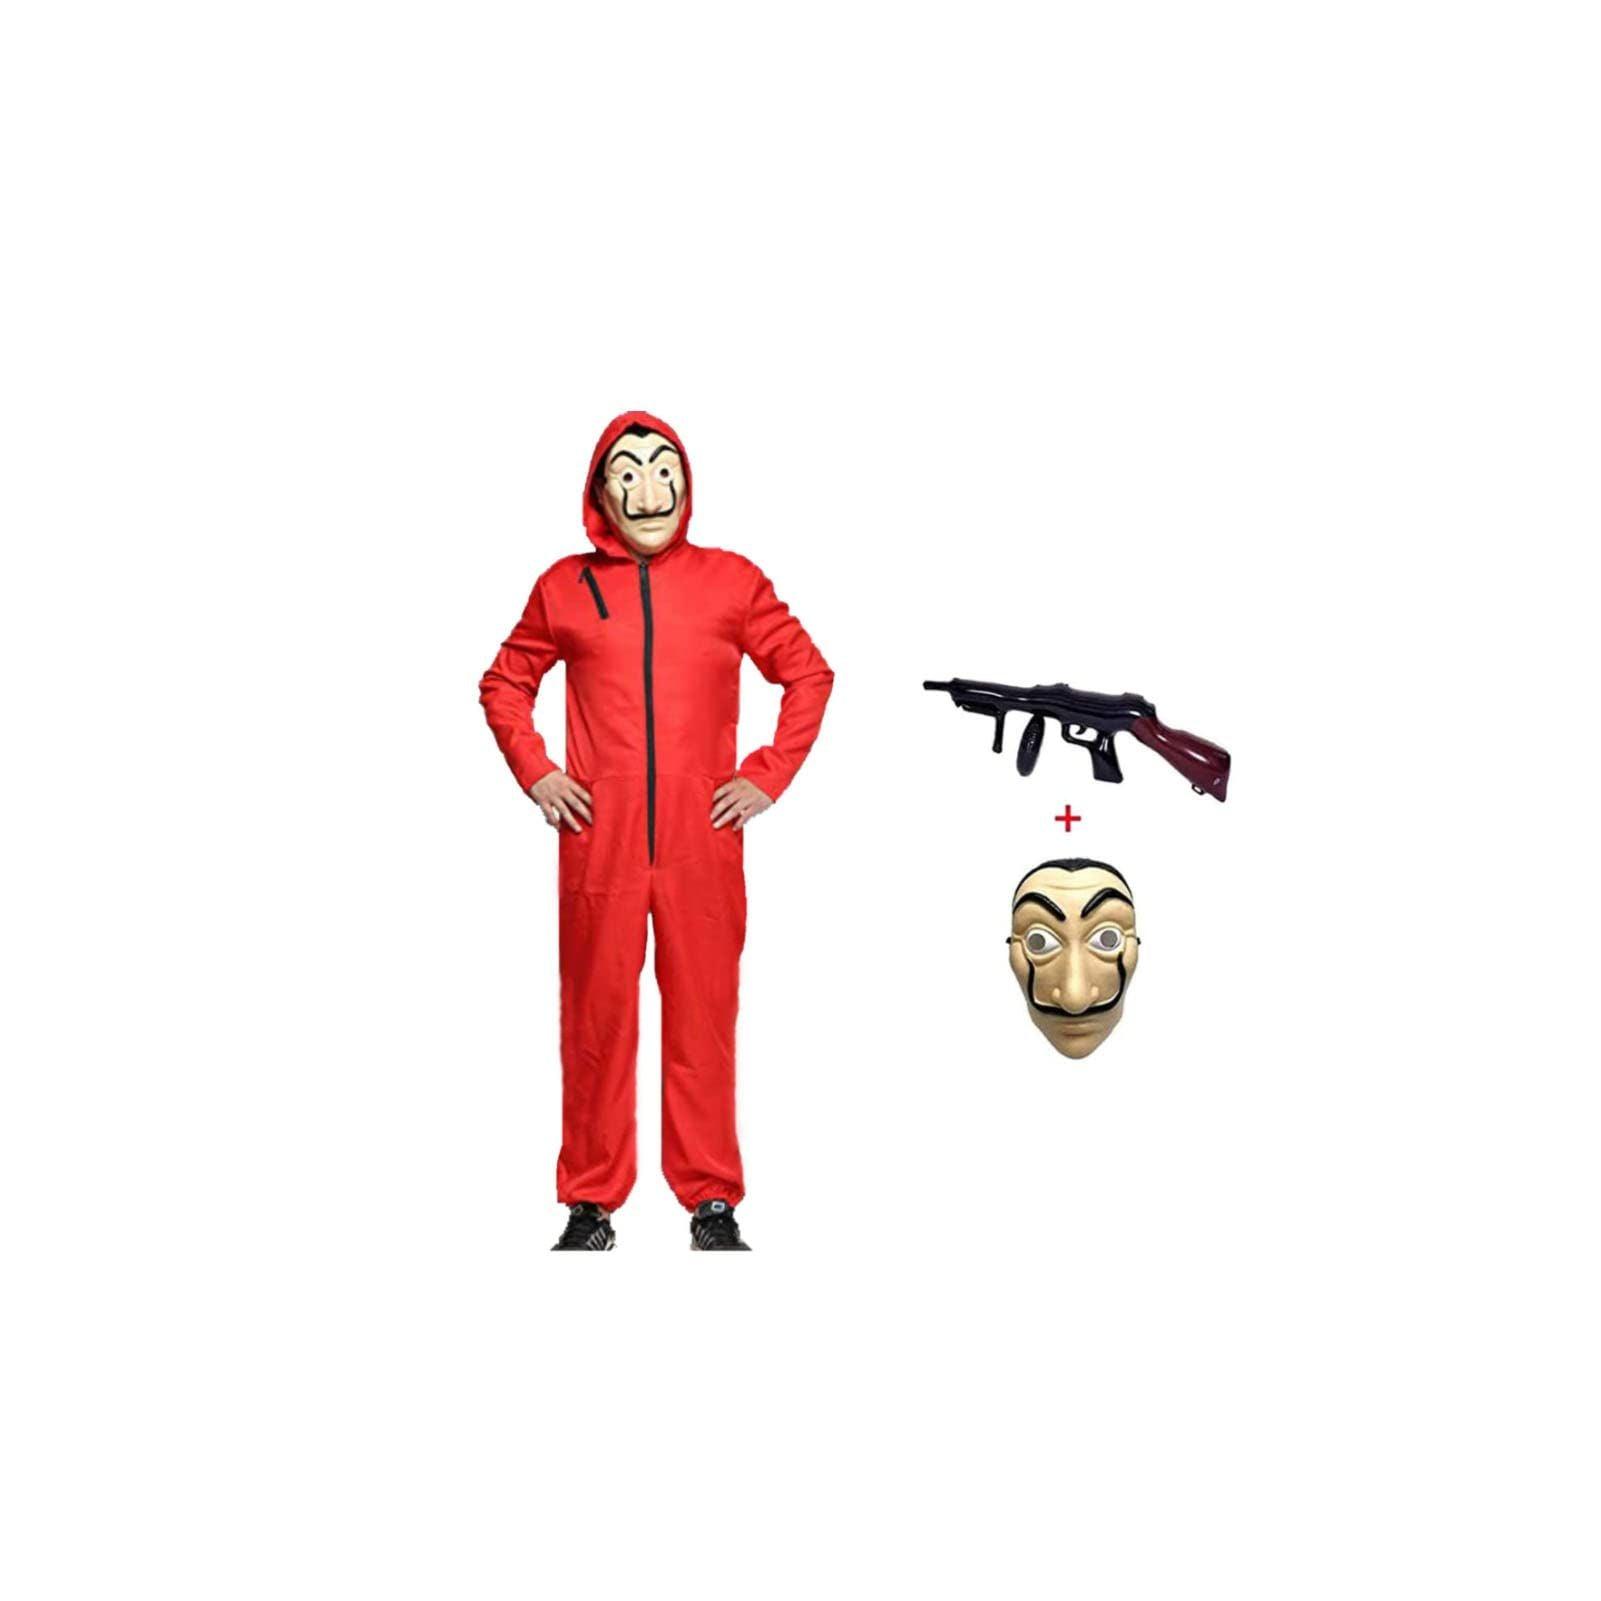 Anxicer Halloween Costume Bank Robber Jumpsuit for Carnival Thief Costume Jumpsuit Red Long Sleeve Romper with Hood, Cosplay Set Mask and Machine Gun Carnival Costume (Adult-S) 0